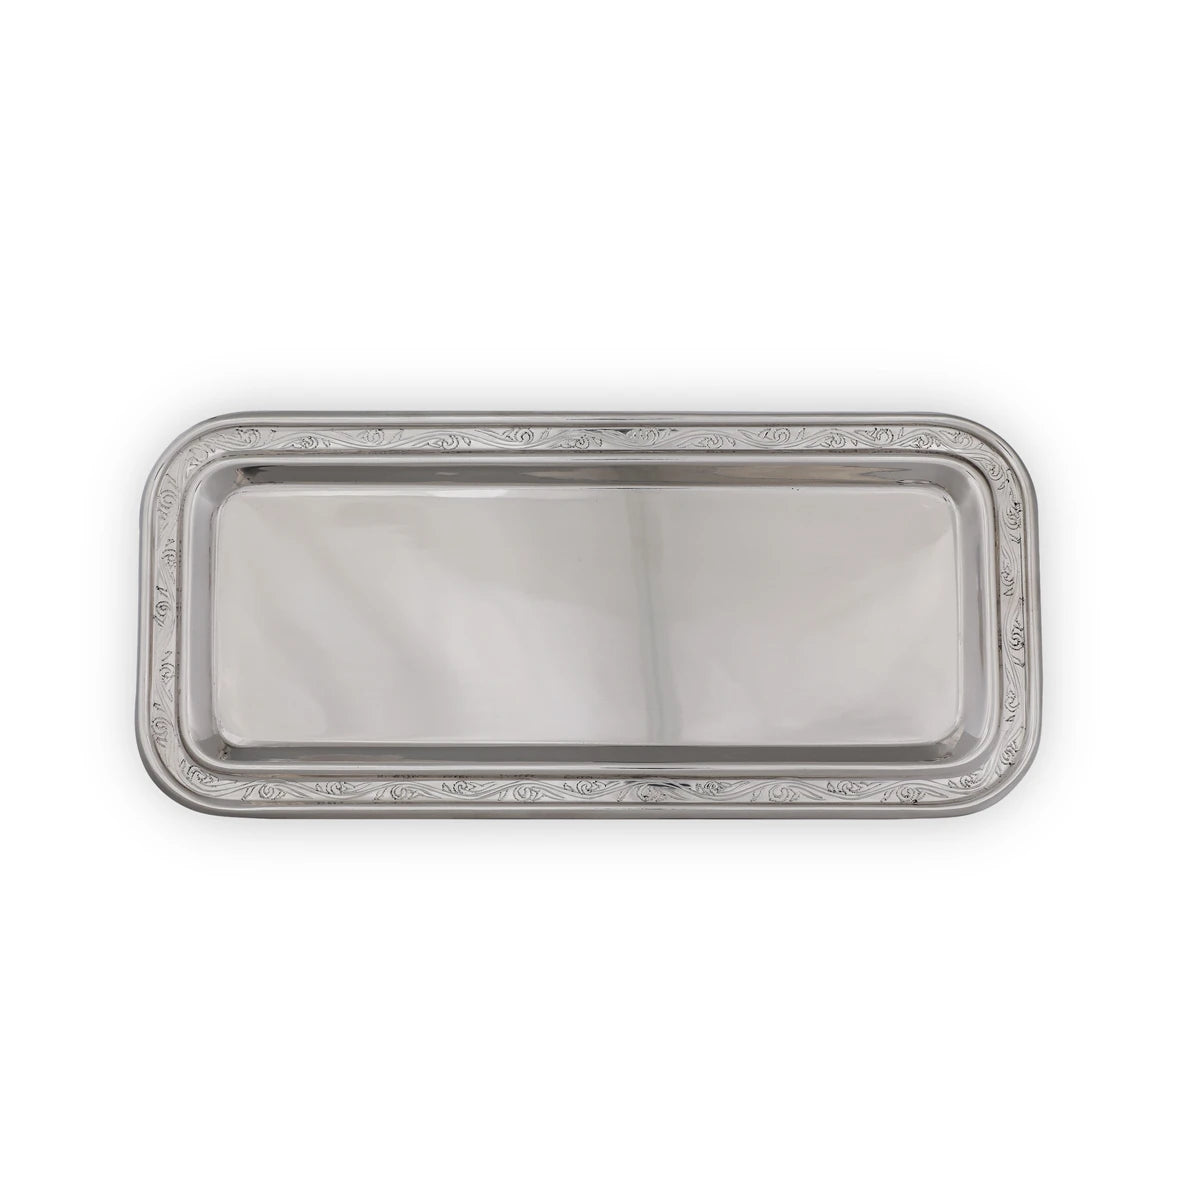 Top View of Serving Tray